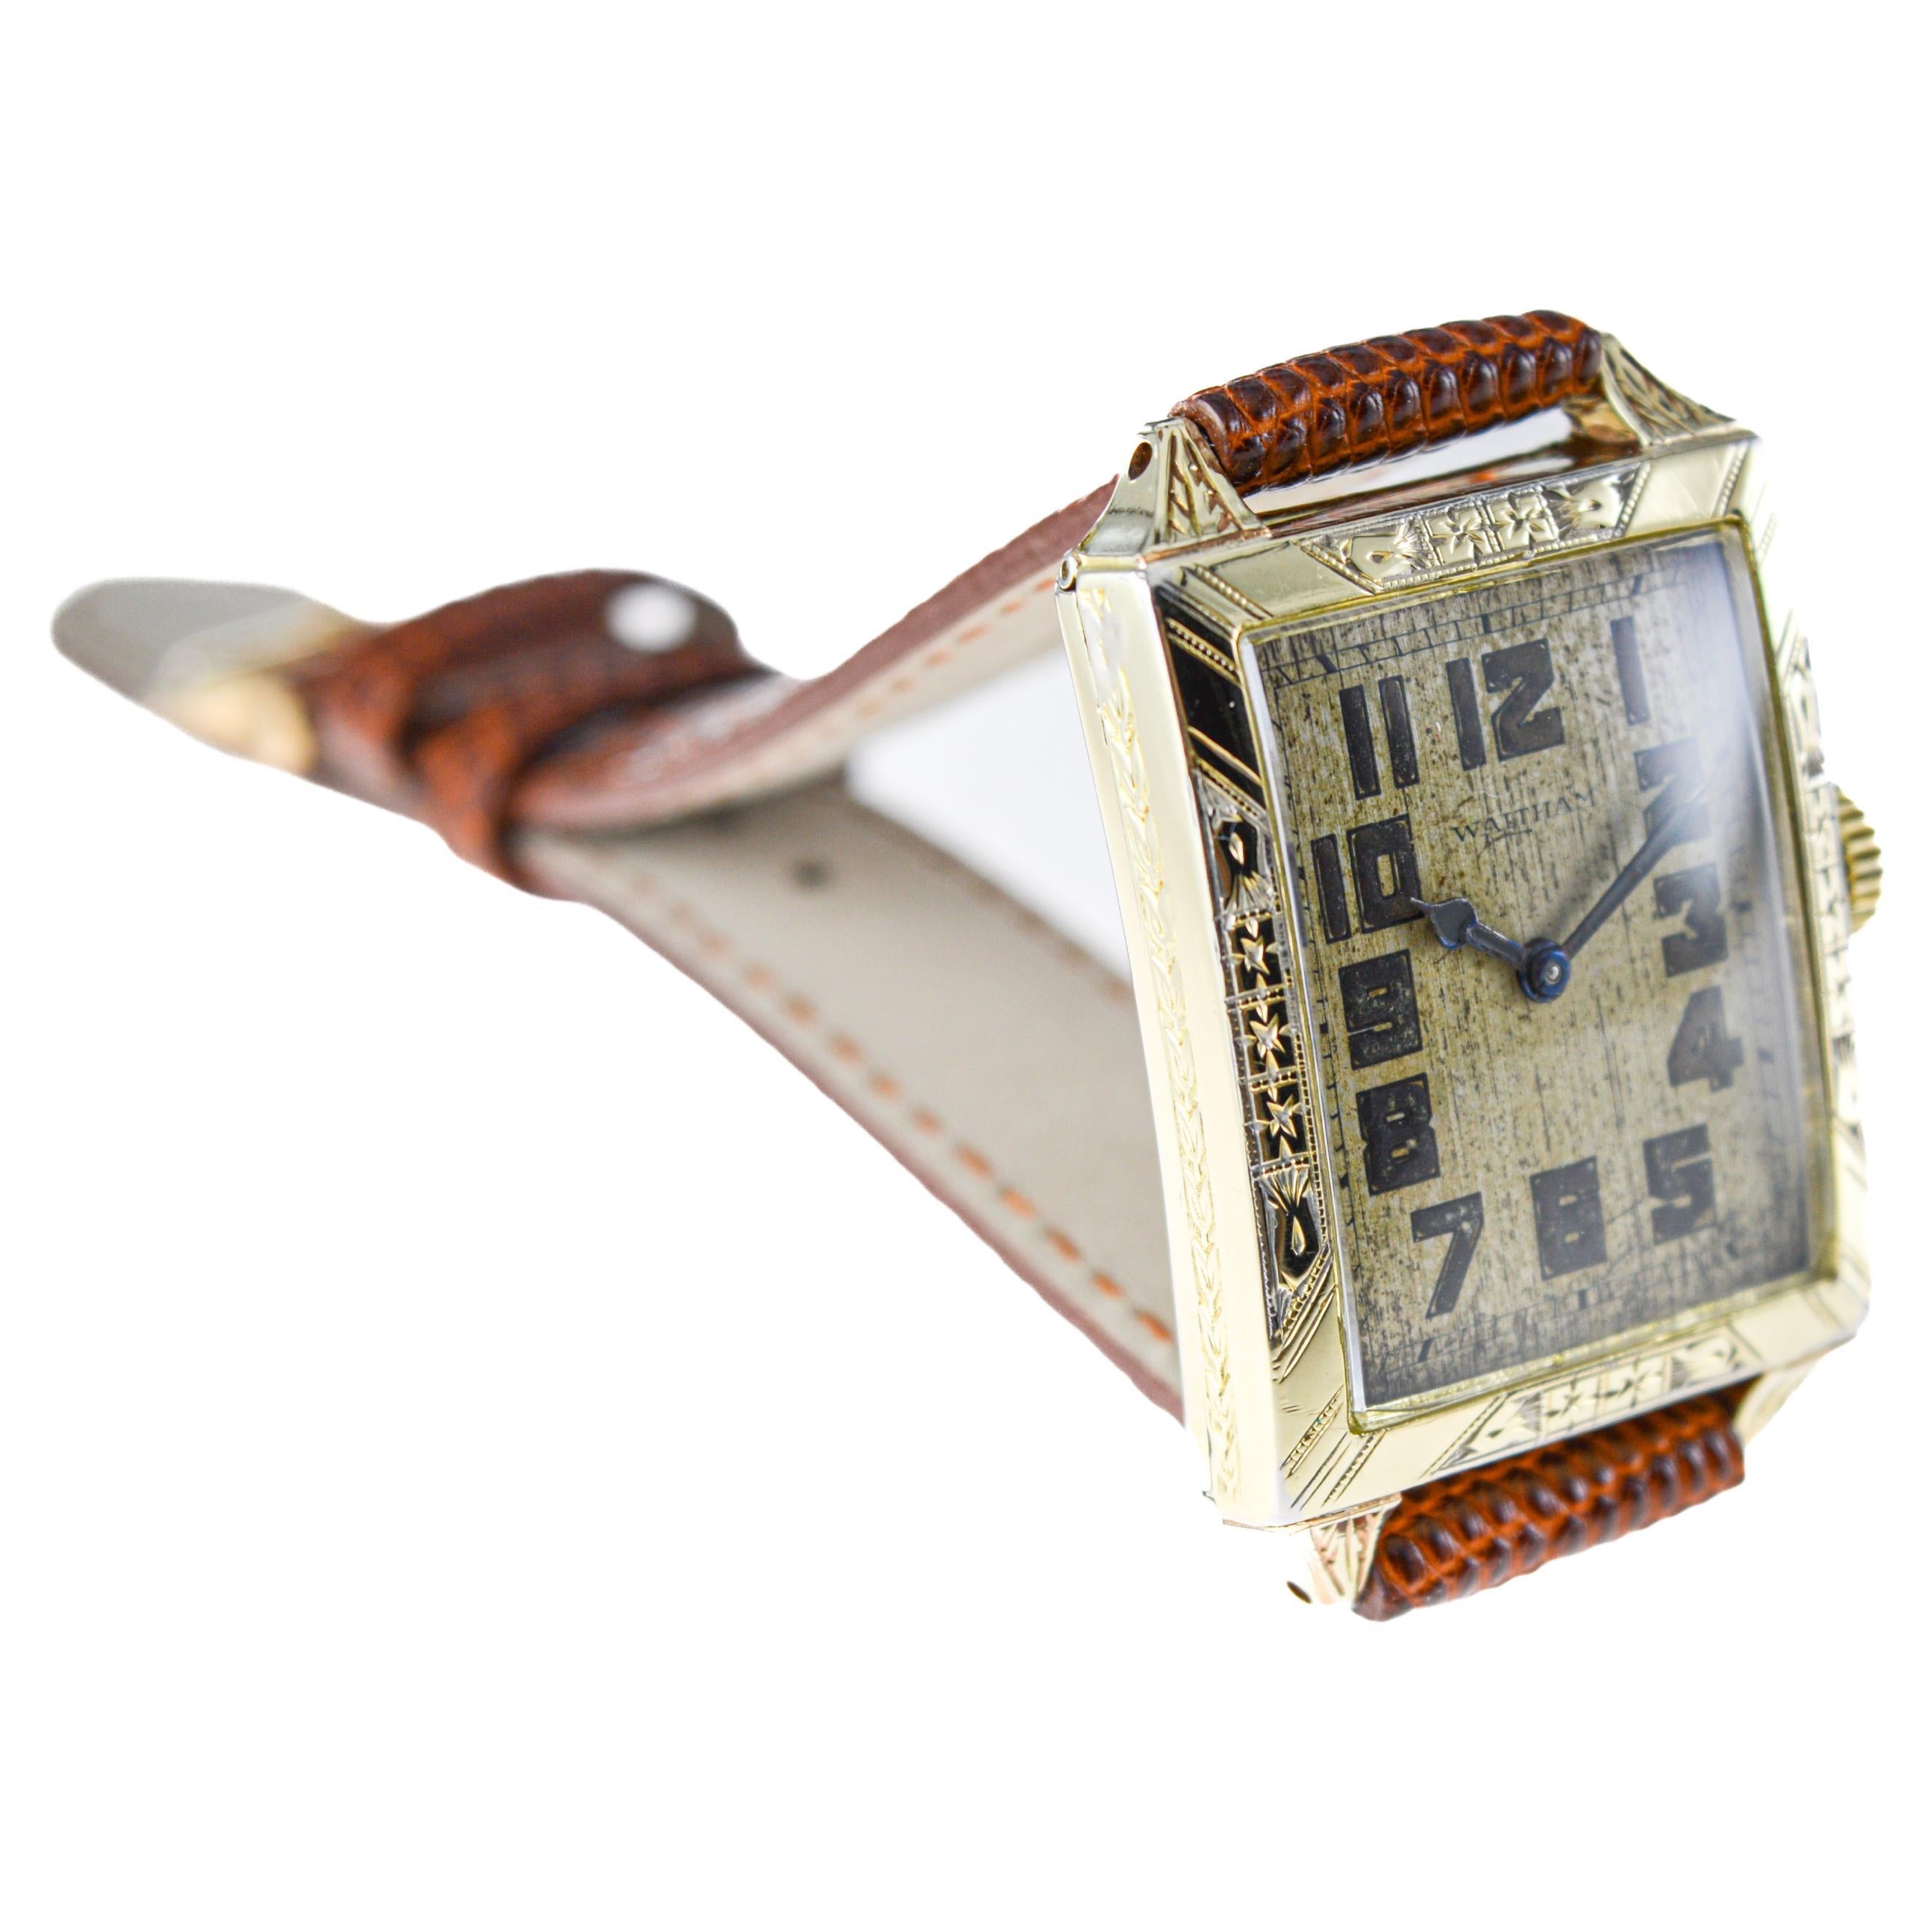 Waltham Yellow Gold Filled Art Deco Watch with Original Dial from 1926 For Sale 4